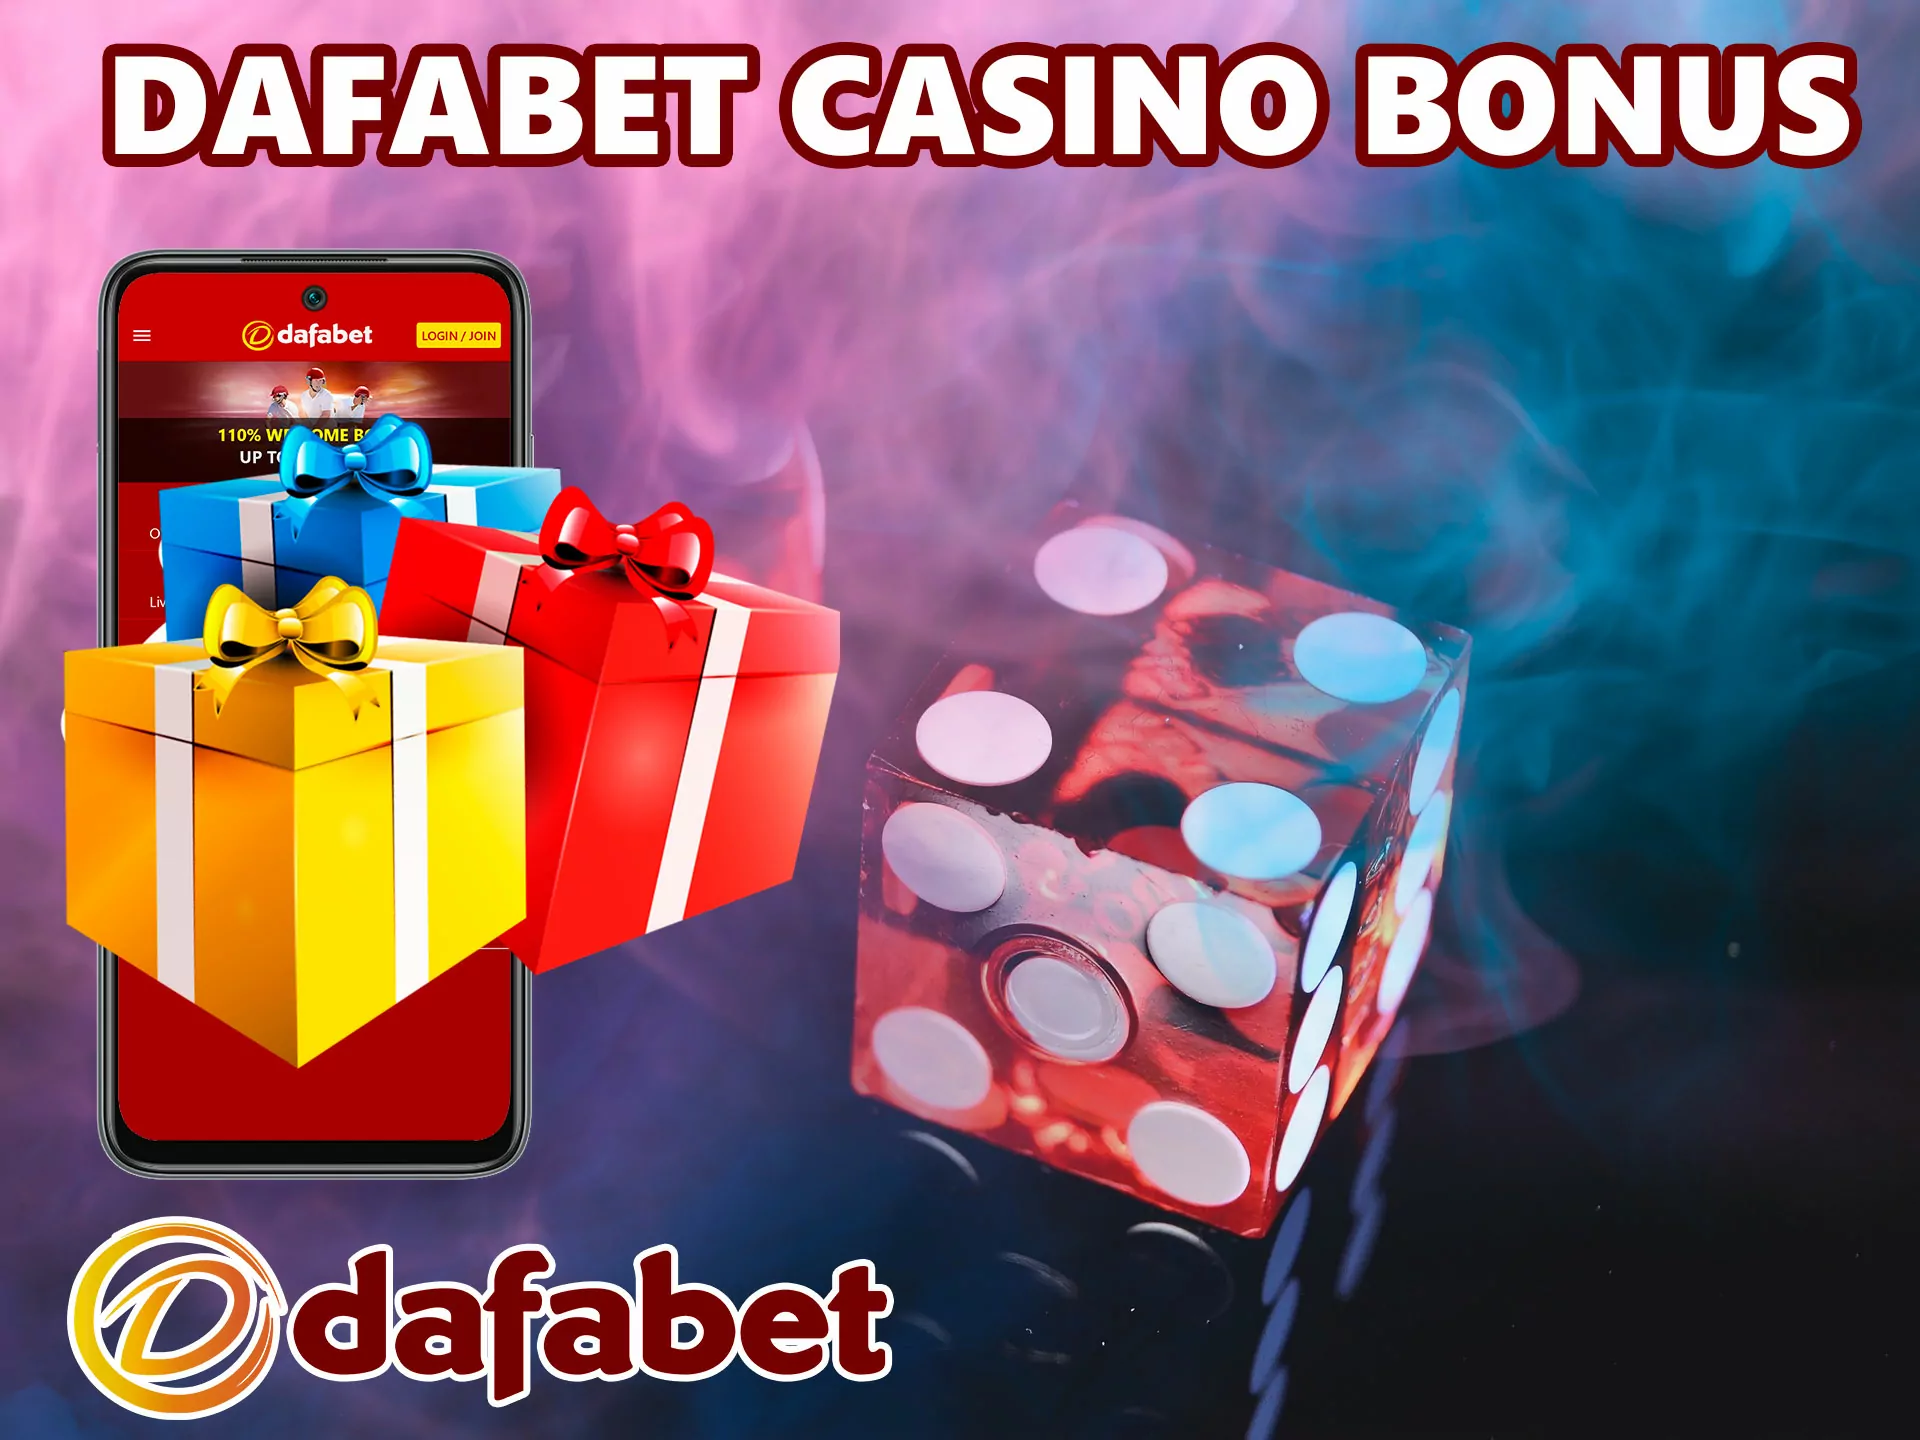 Double your first deposit up to 12,000 BDT, replenish your account with at least 1,000 BDT, in our article we describe in detail how to do it in Dafabet.